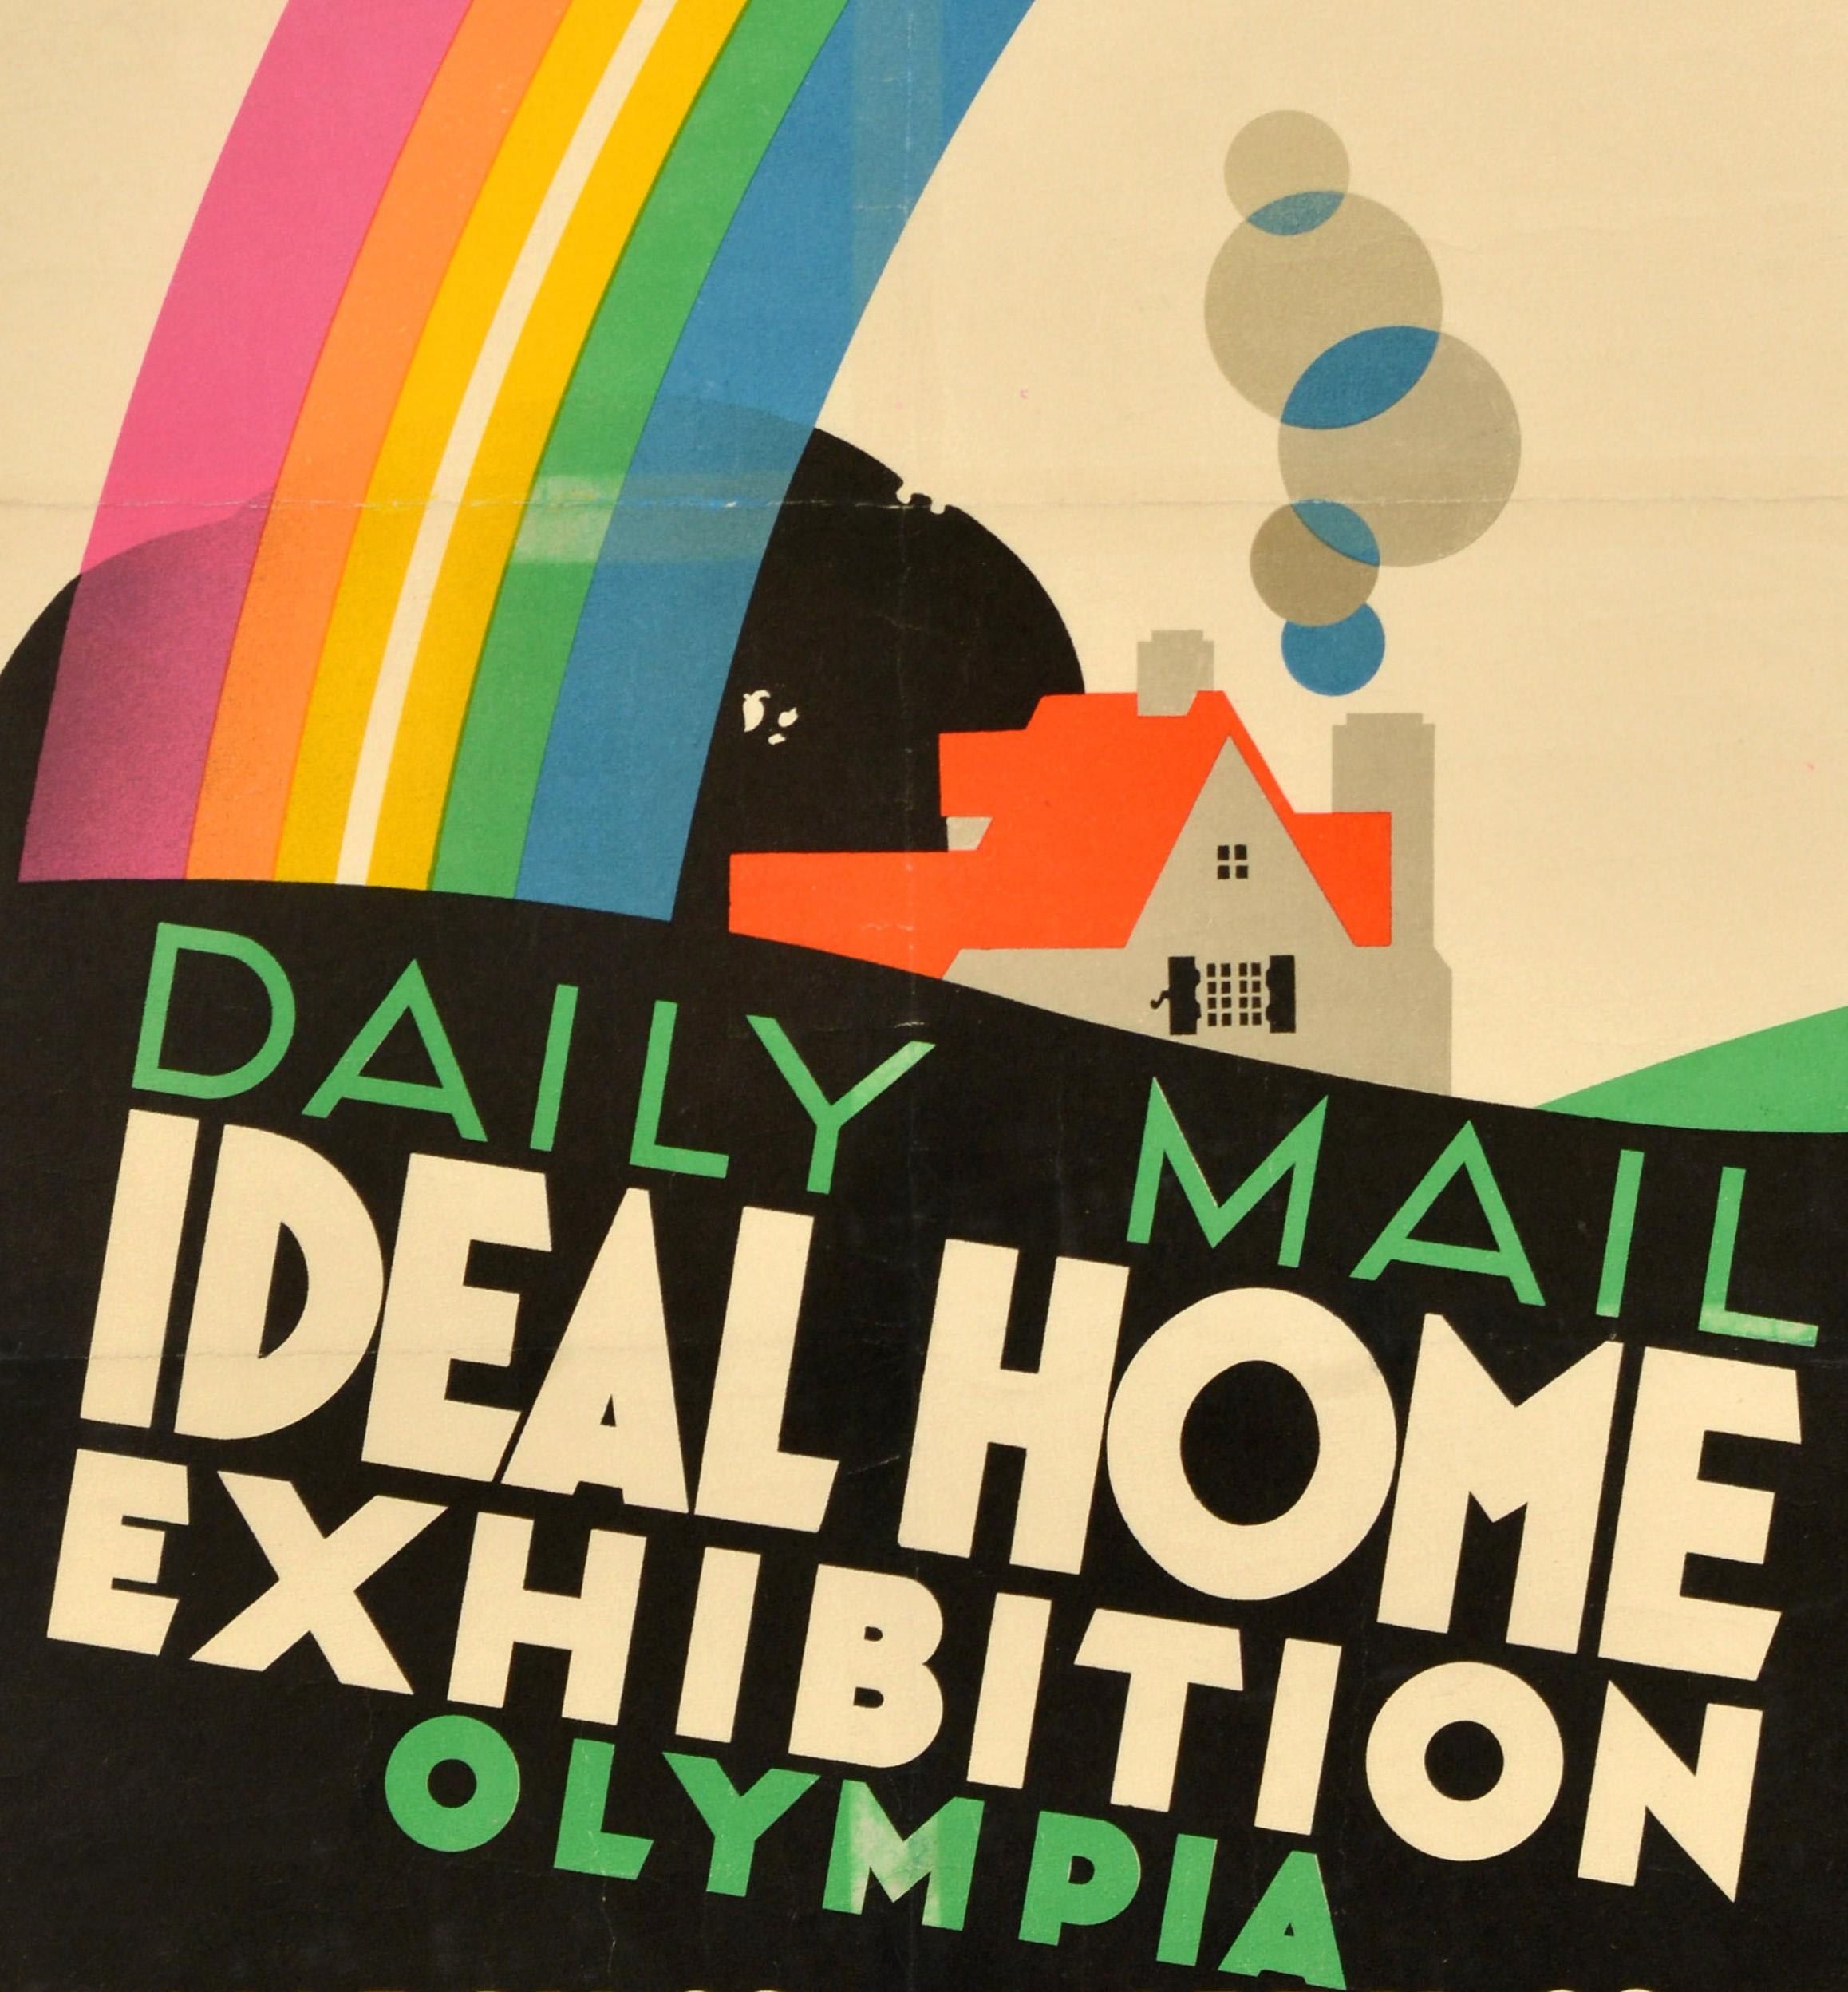 Original Vintage Advertising Poster Ideal Home Exhibition Daily Mail Olympia - Print by Frank Newbould